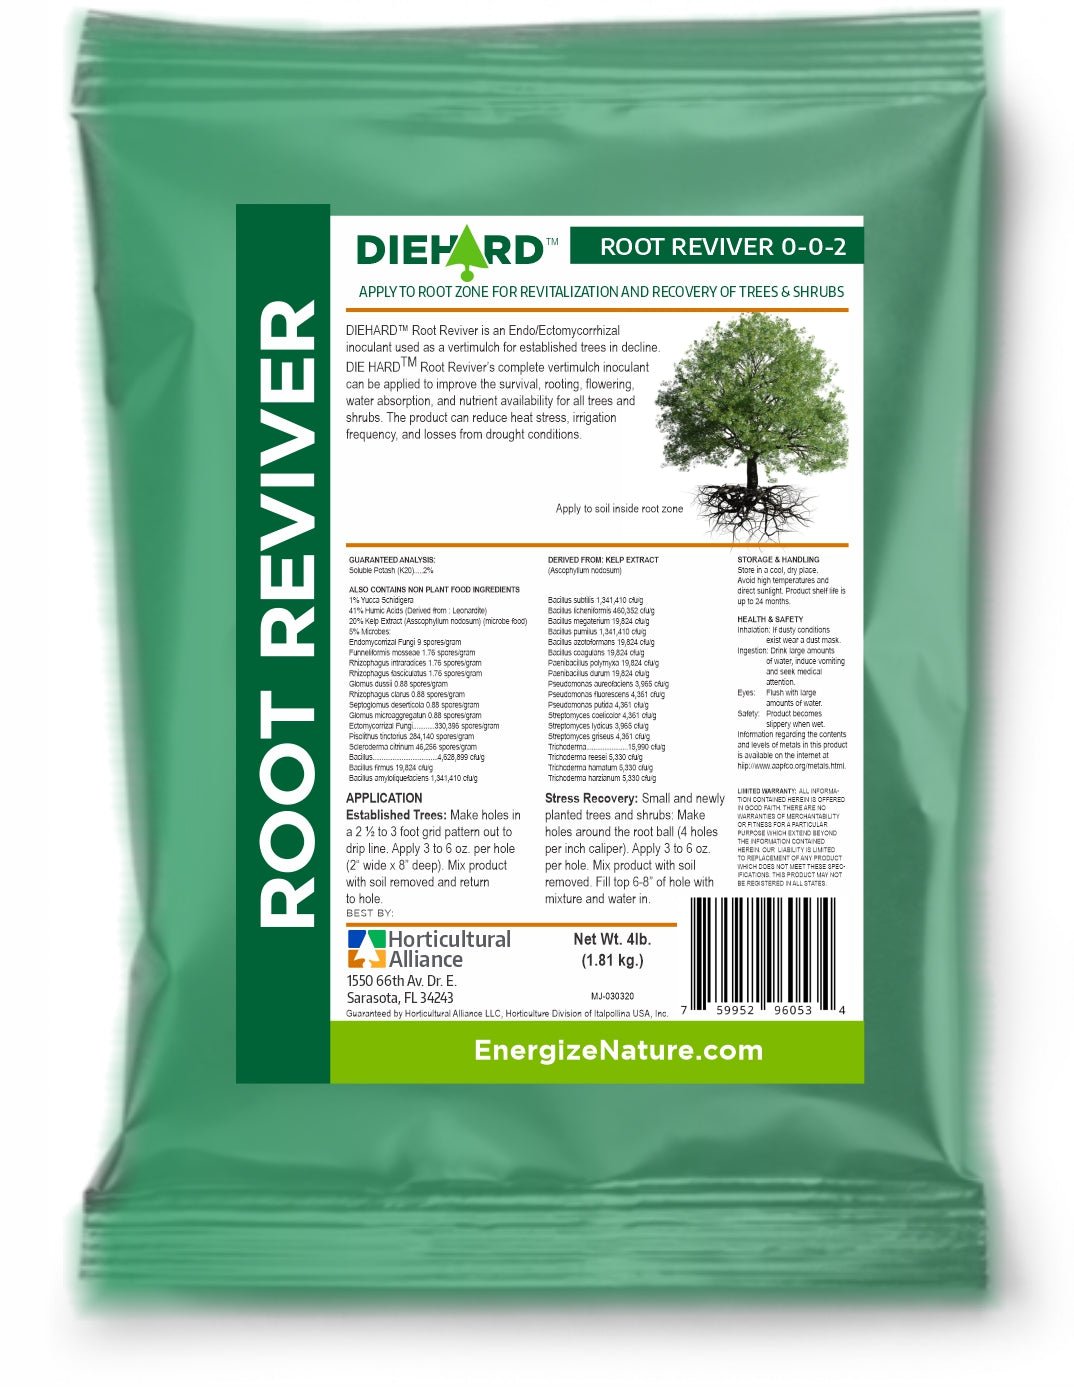 DIEHARD Root Reviver - Tree Injection Products Co.